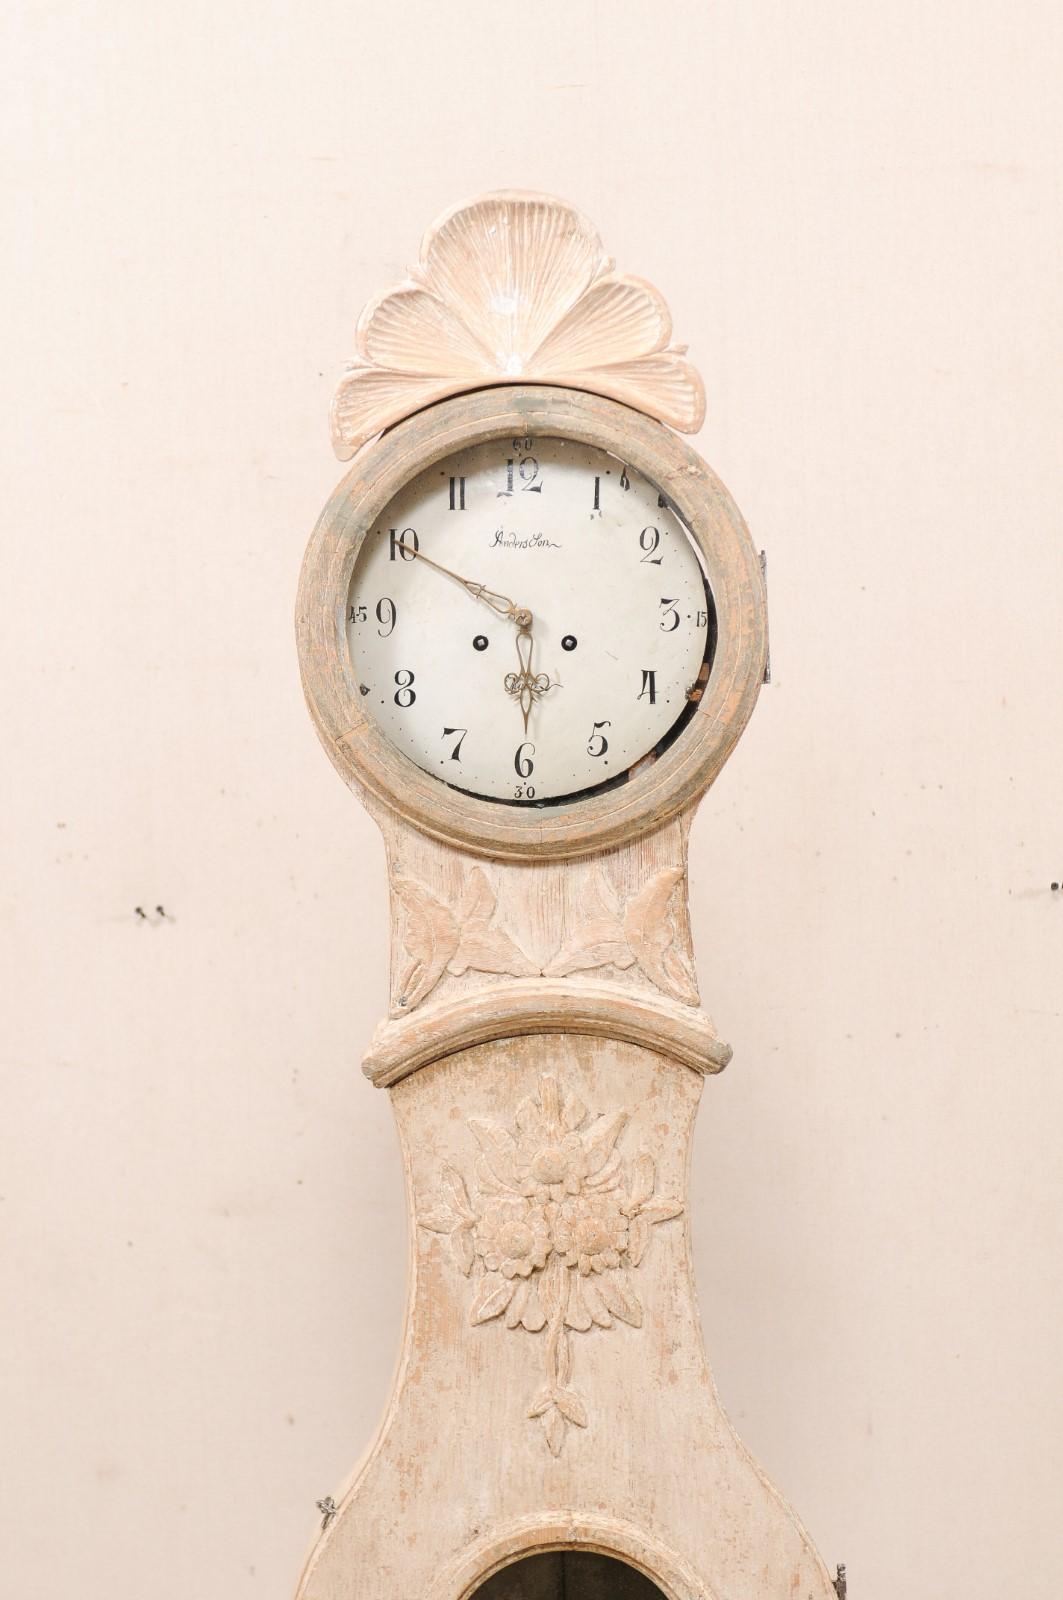 Carved Northern Swedish 19th C. Floor Clock w/ Delicate Floral Carving & Fanned Bonnet